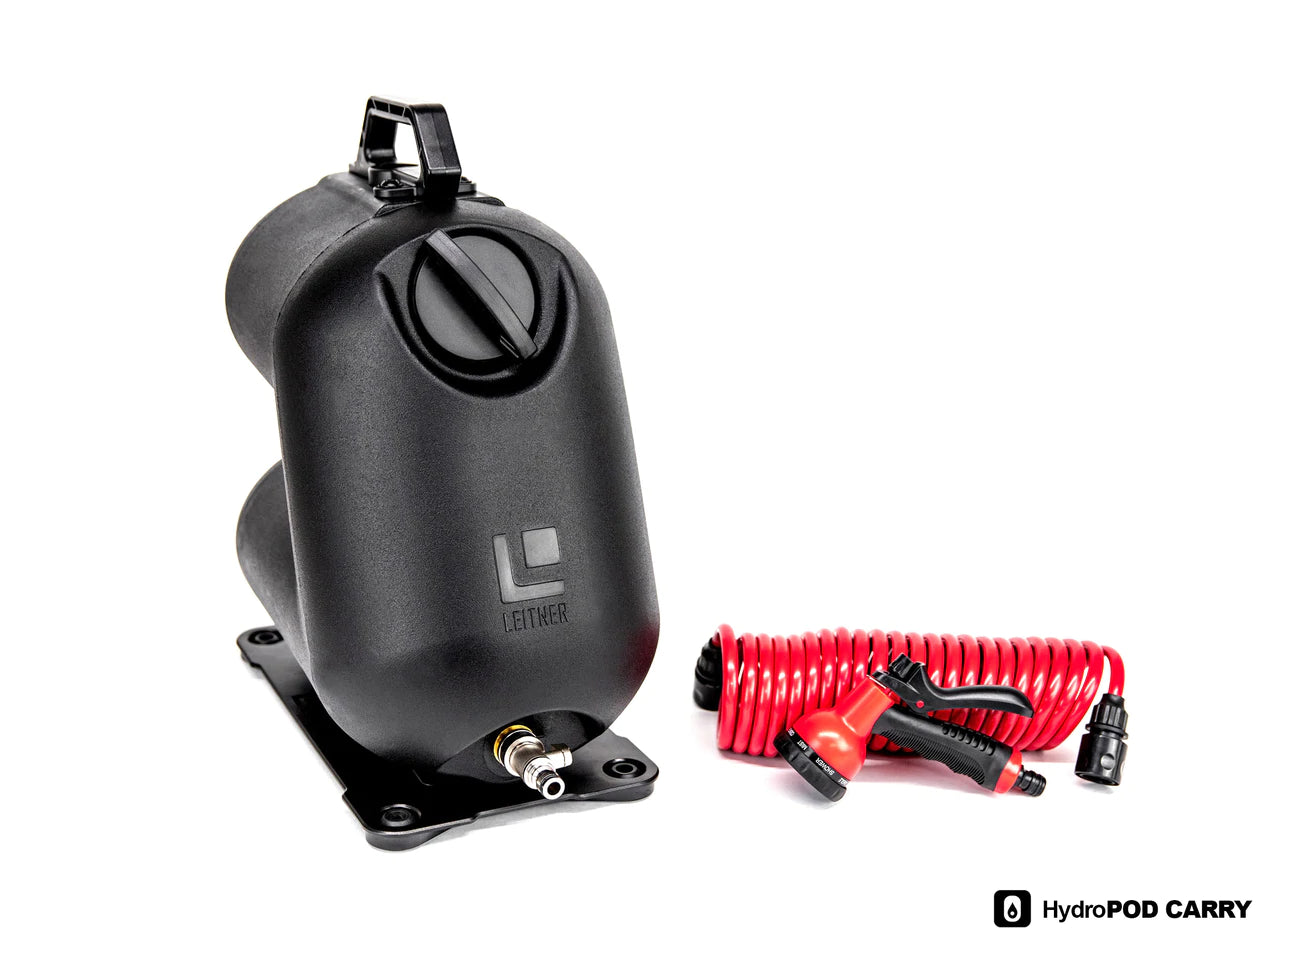 HydroPOD Carry tank can hold up to 4.8 gallons